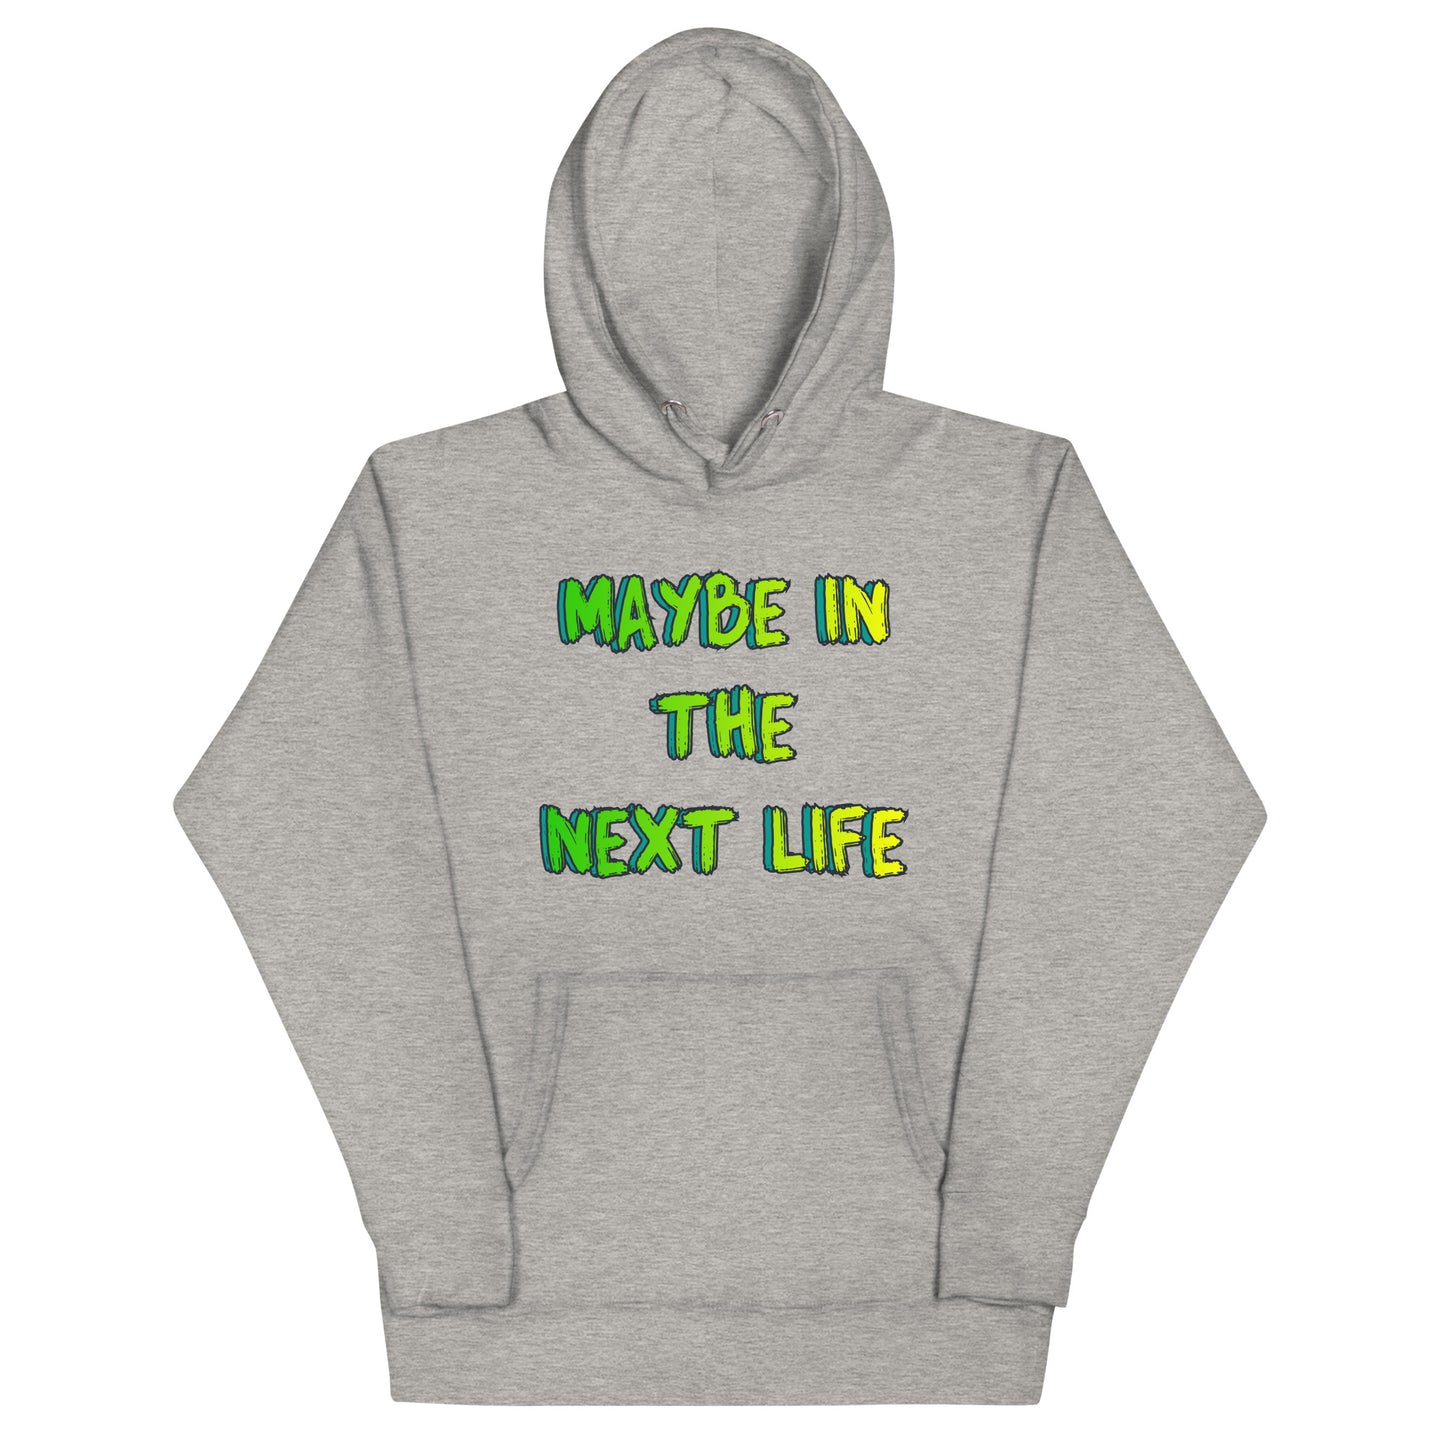 Maybe In The Next Life Hoodie